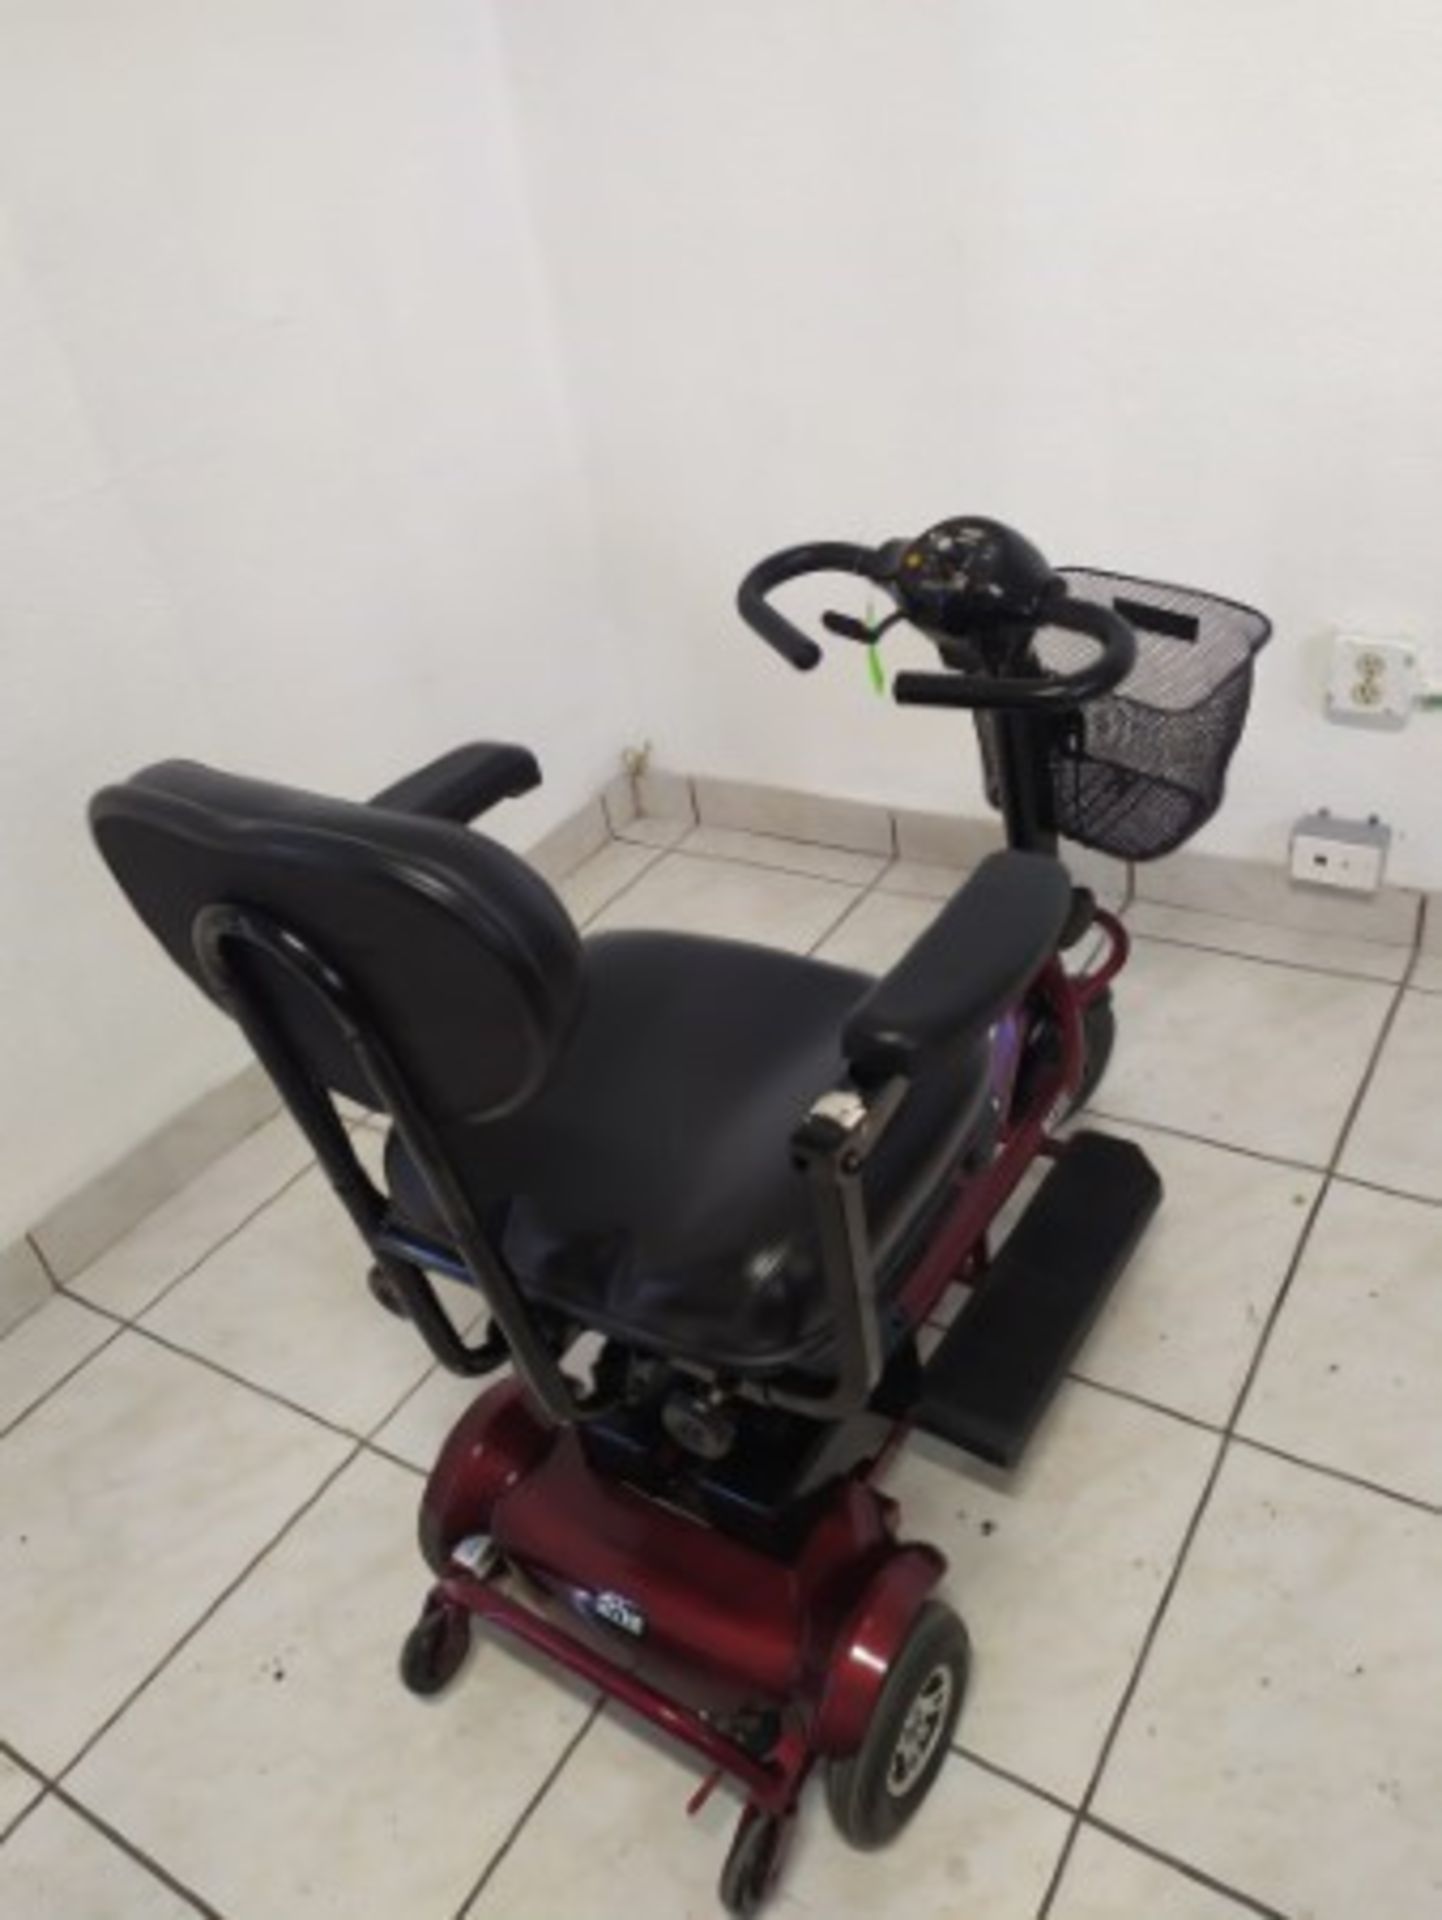 2009 DRIVE HAWK 3-WHEEL SCOOTER WITH BASKET - RED - 250LB CAPACITY - SERIAL No. 2A06090137PQ (NO CHA - Image 5 of 6